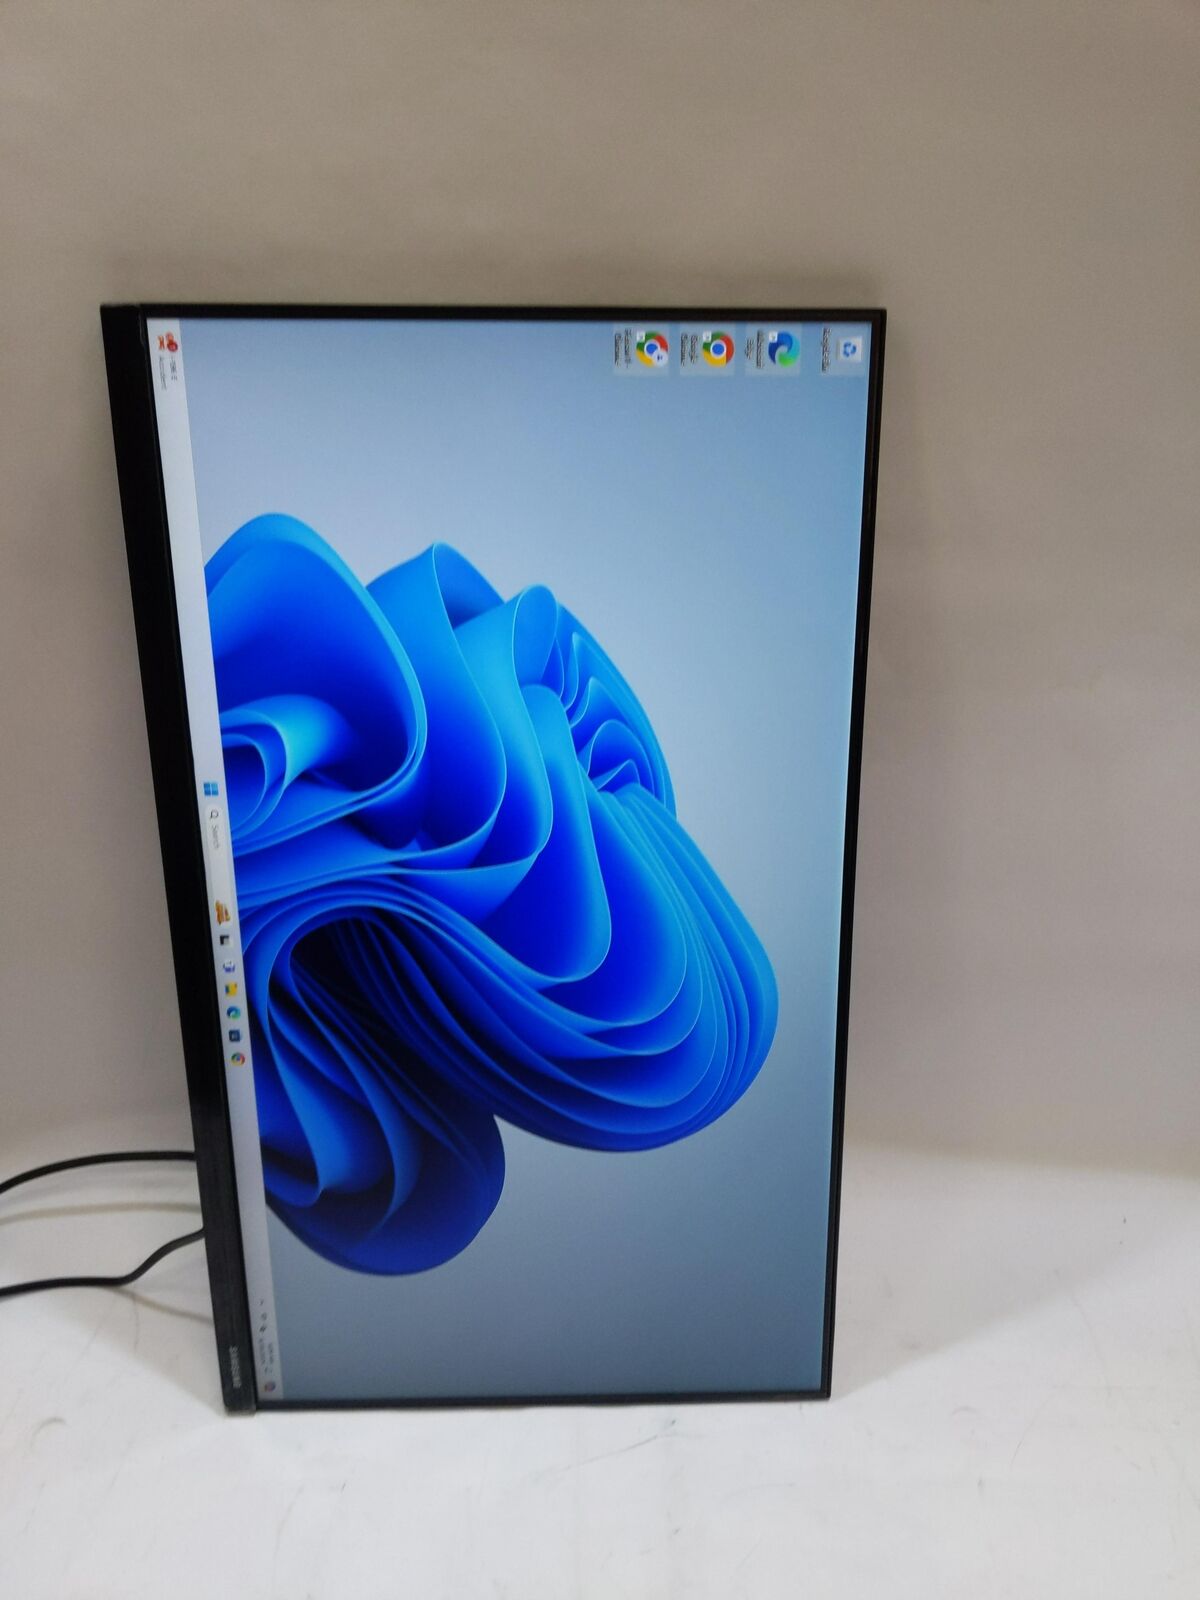 Samsung T350 Series Lf24t350fhnxza 24 Ips Led Fhd, Computer Monitor